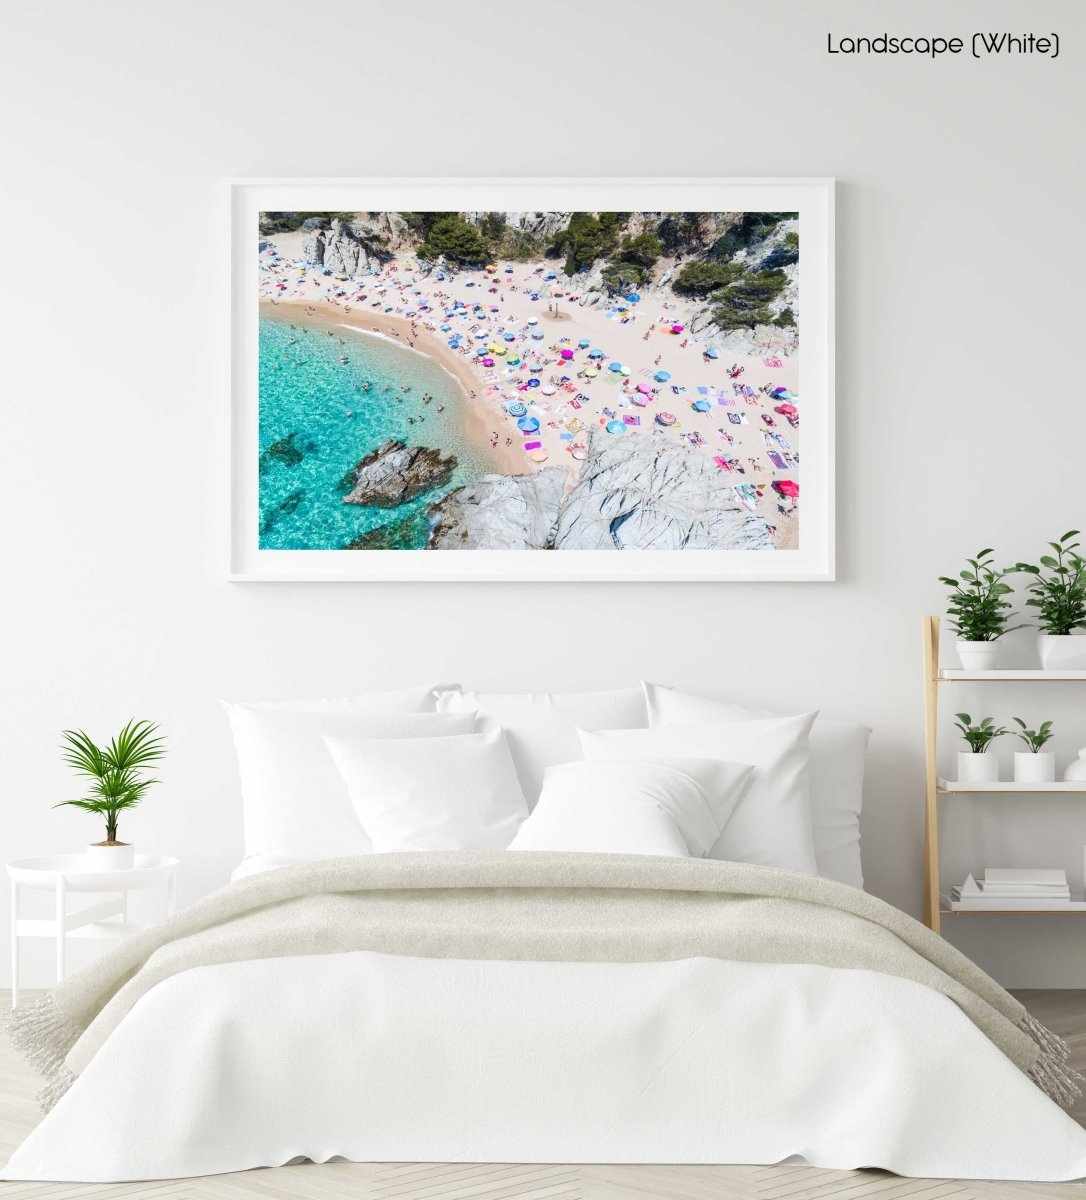 Colorful umbrellas and people lying on beach taken from the sky in a white fine art frame